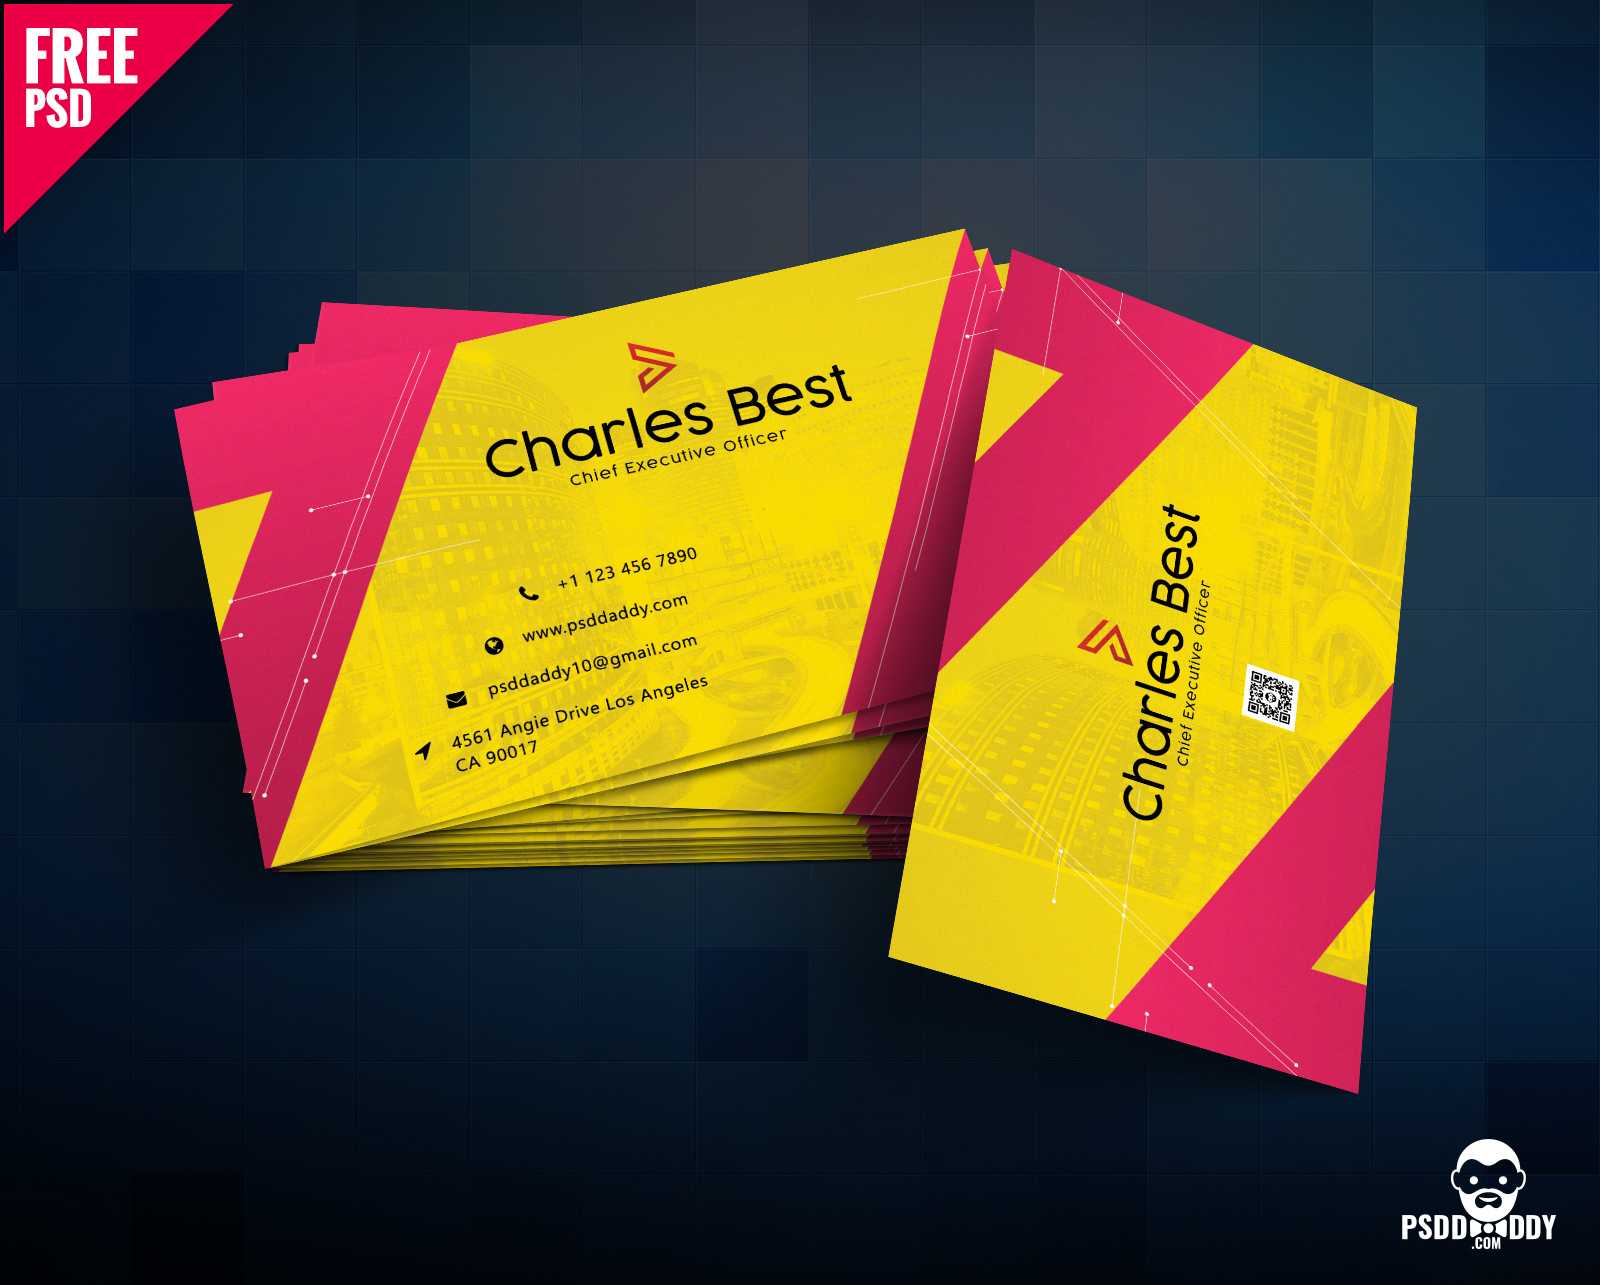 Download] Creative Business Card Free Psd | Psddaddy With Business Card Maker Template